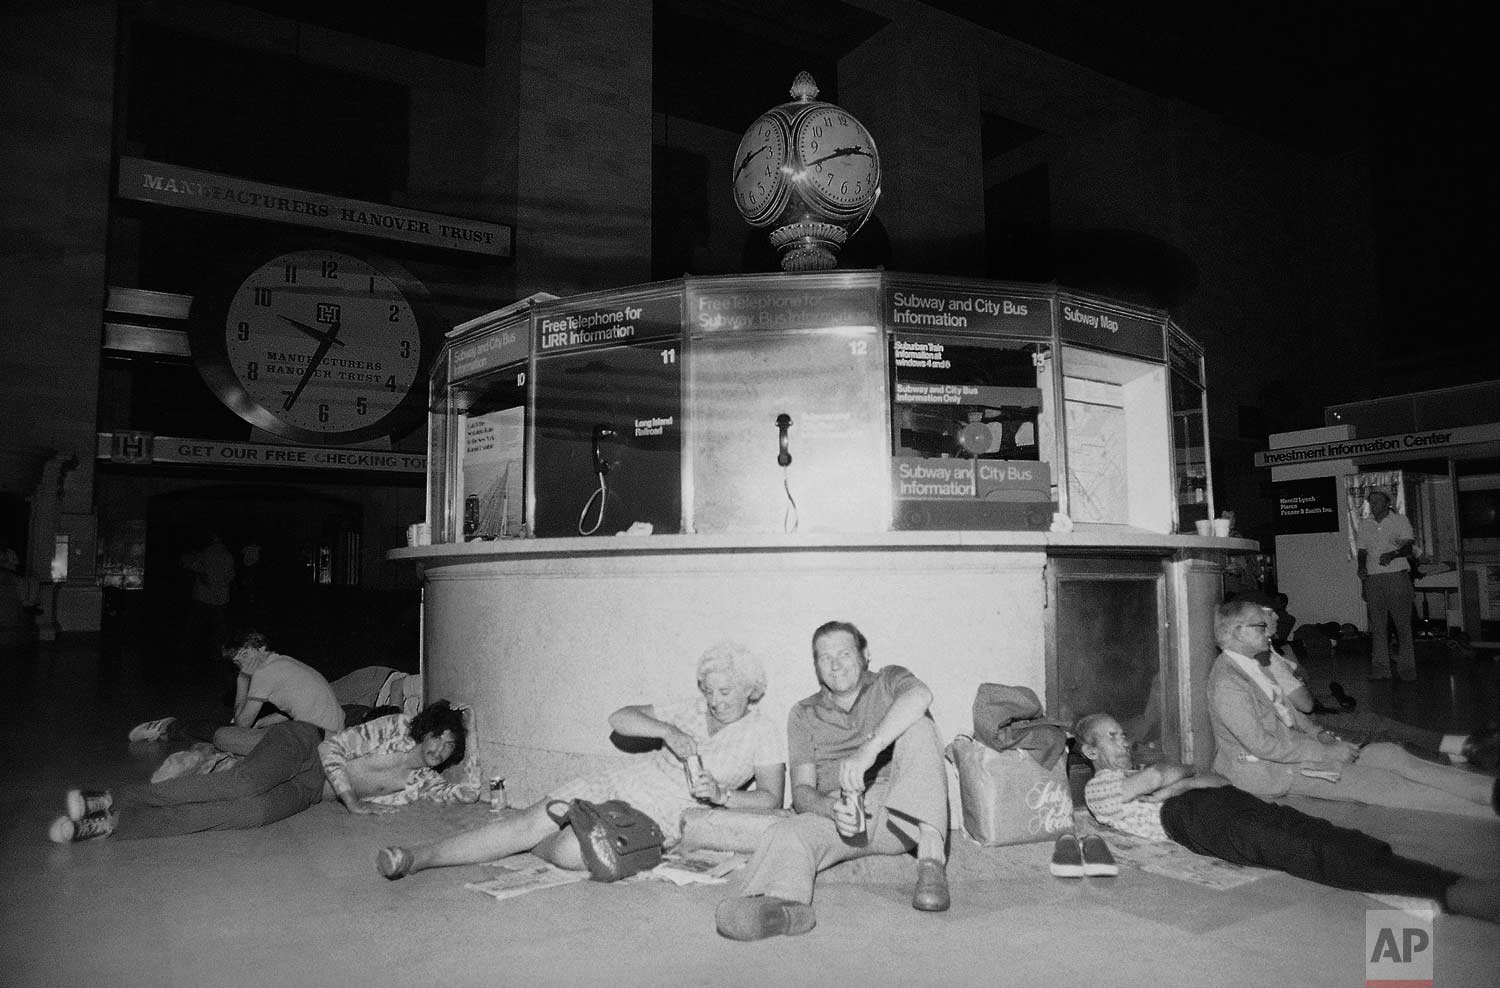  People huddle against the information kiosk in New York's Grand Central Station, Thursday, July 14, 1977 after being stranded by a power failure in the city, its boroughs and some neighboring areas. Grand Central is a crossroad for commuter trains a